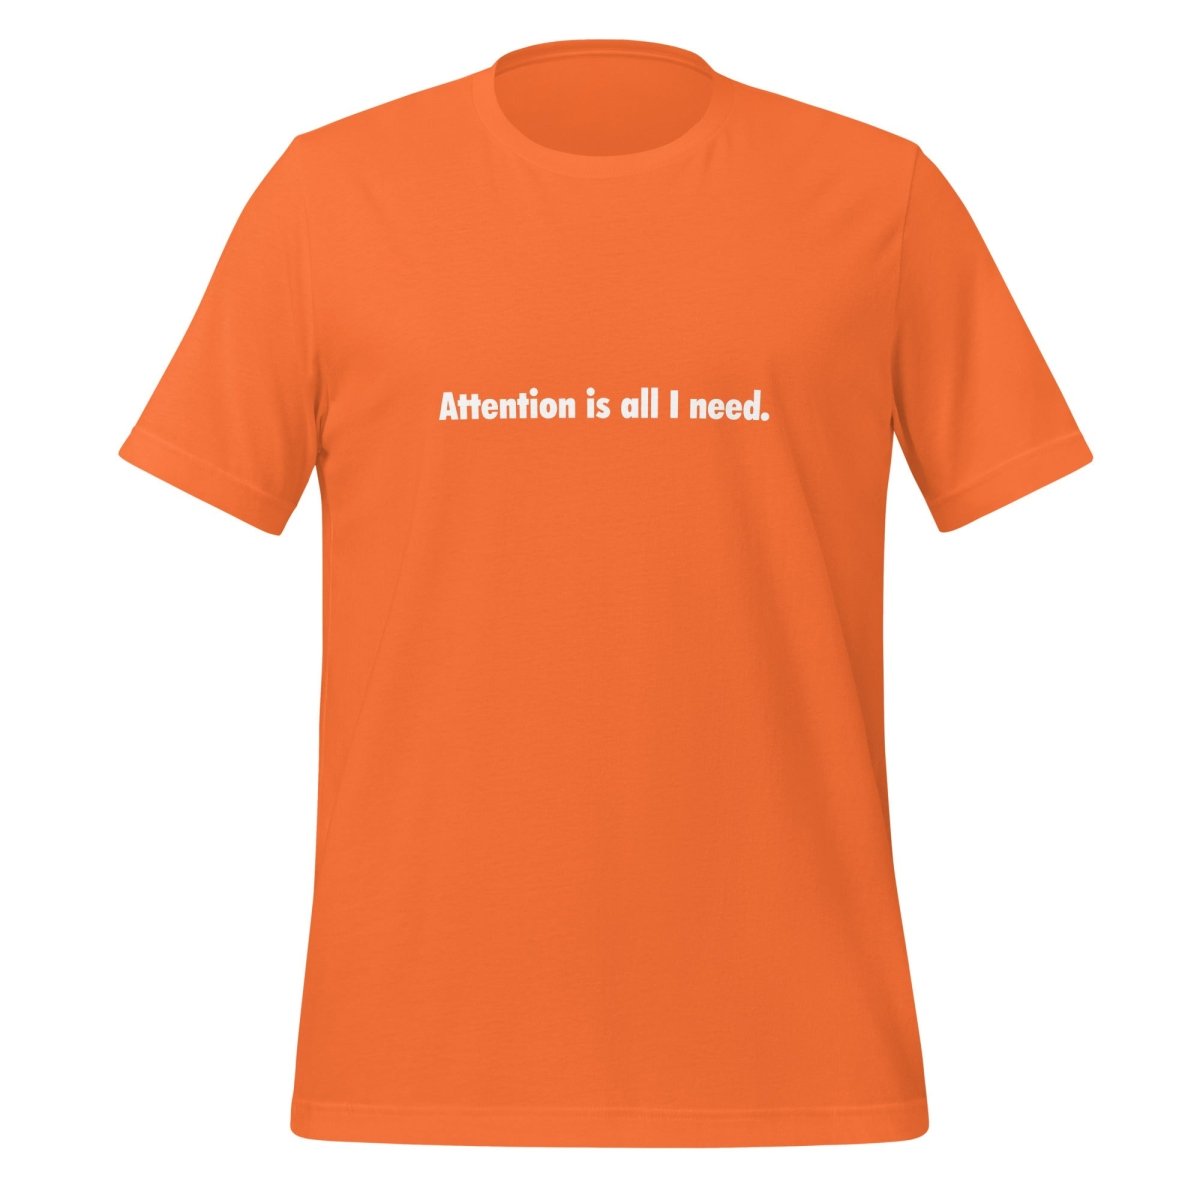 Attention is all I need. T - Shirt (unisex) - Orange - AI Store